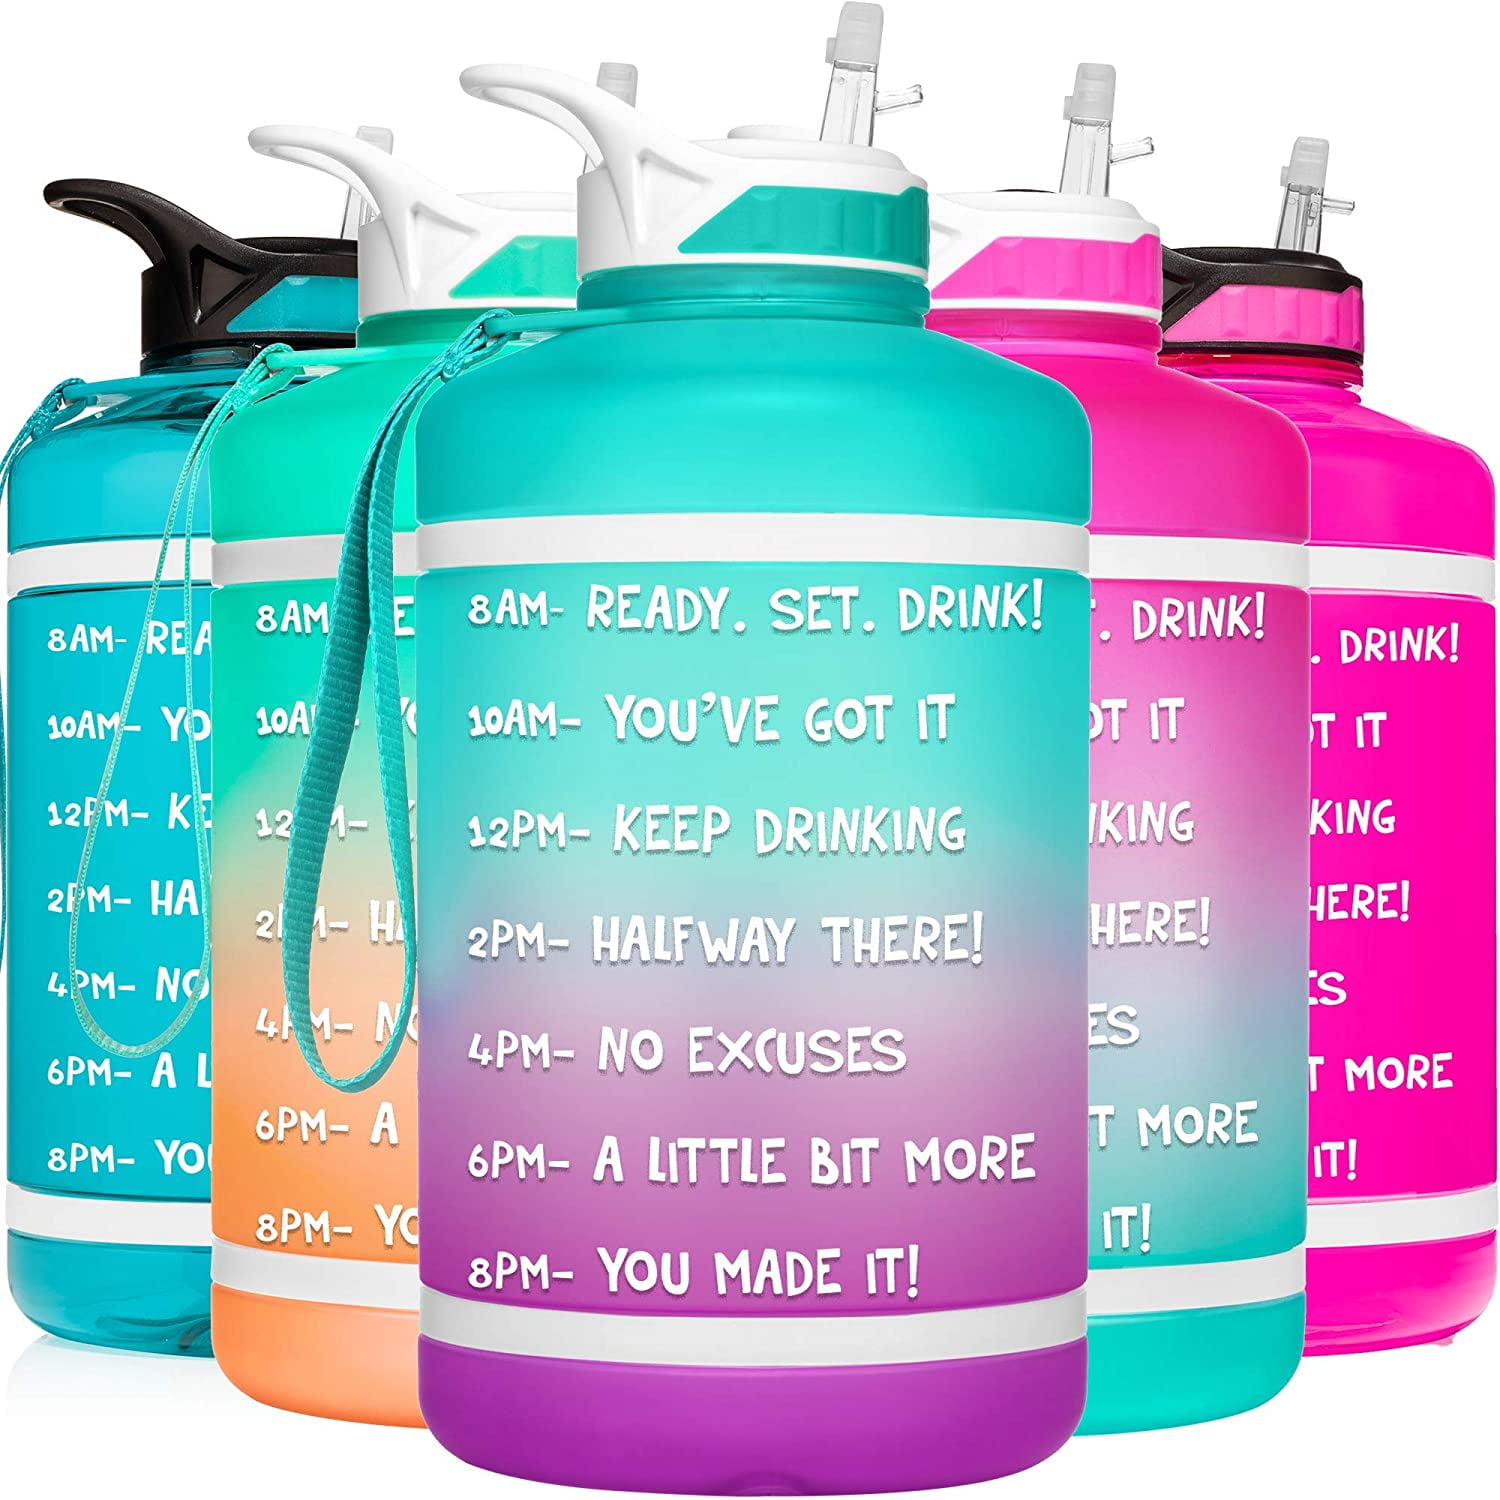 HydroMATE 32 oz Water Bottle with Straw Time Marked Sunrise